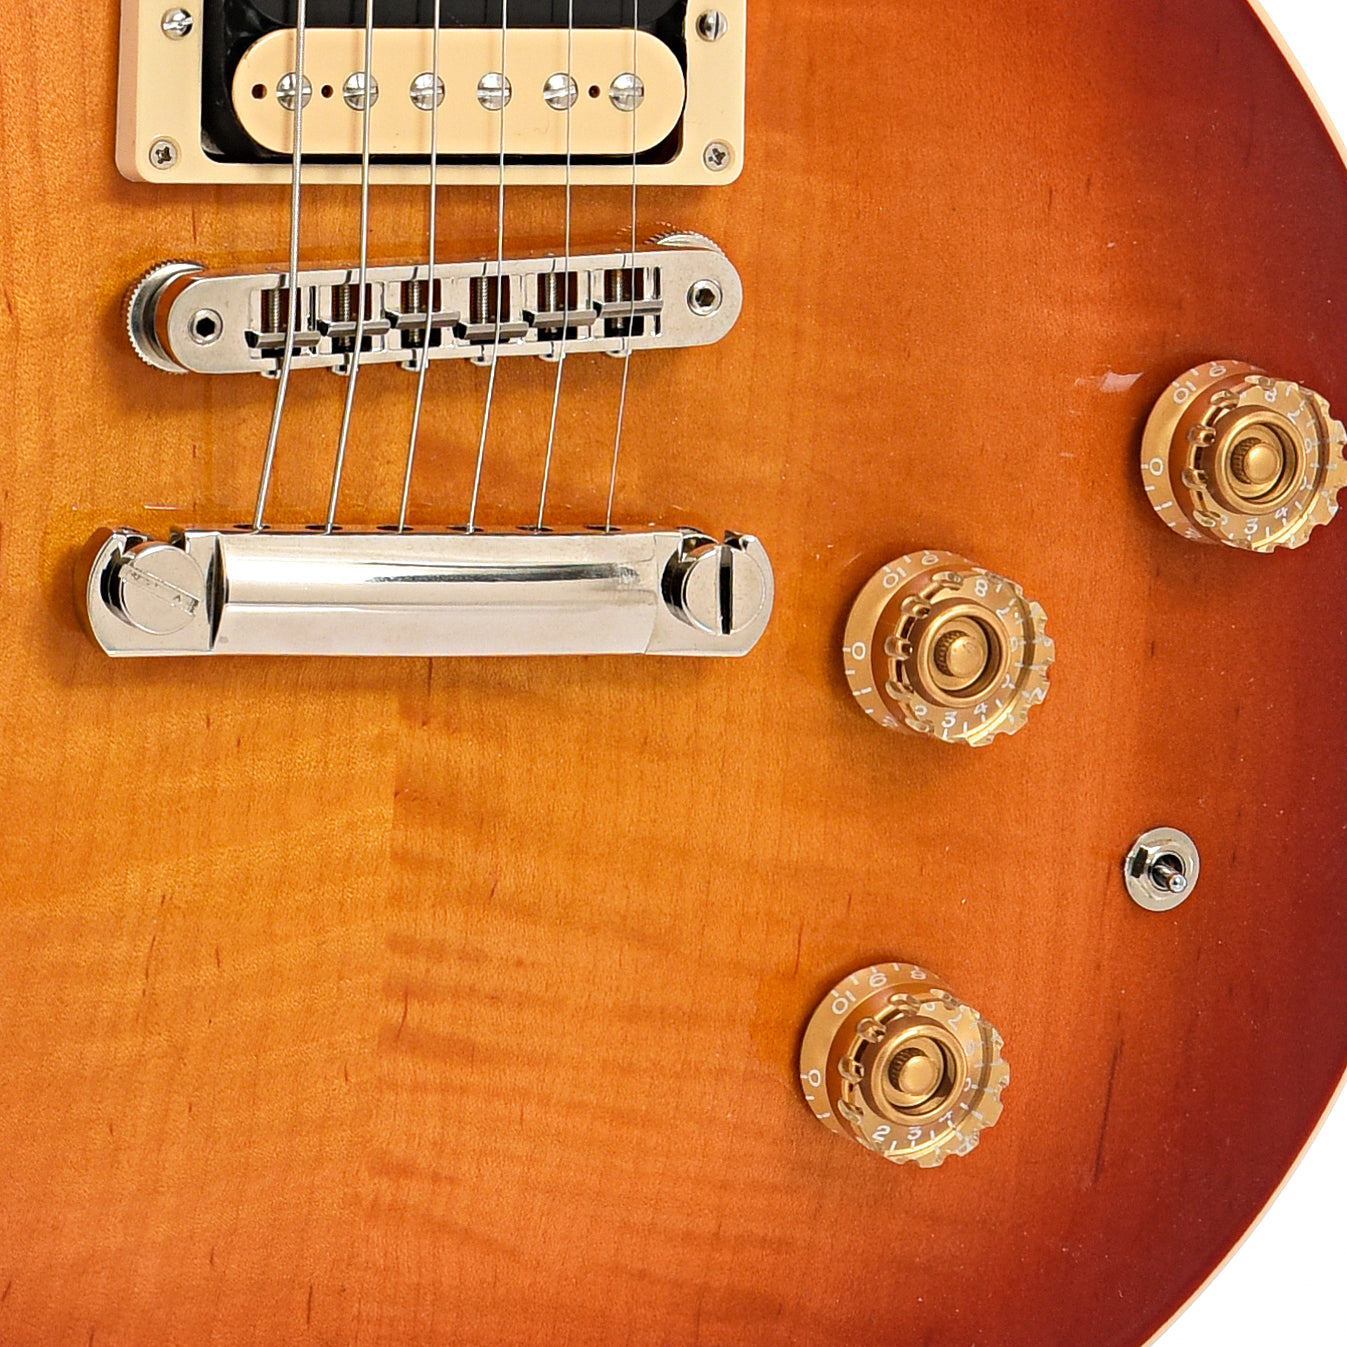 Tailpiece, Bridge and controls of Gibson Les Paul Classic 100 